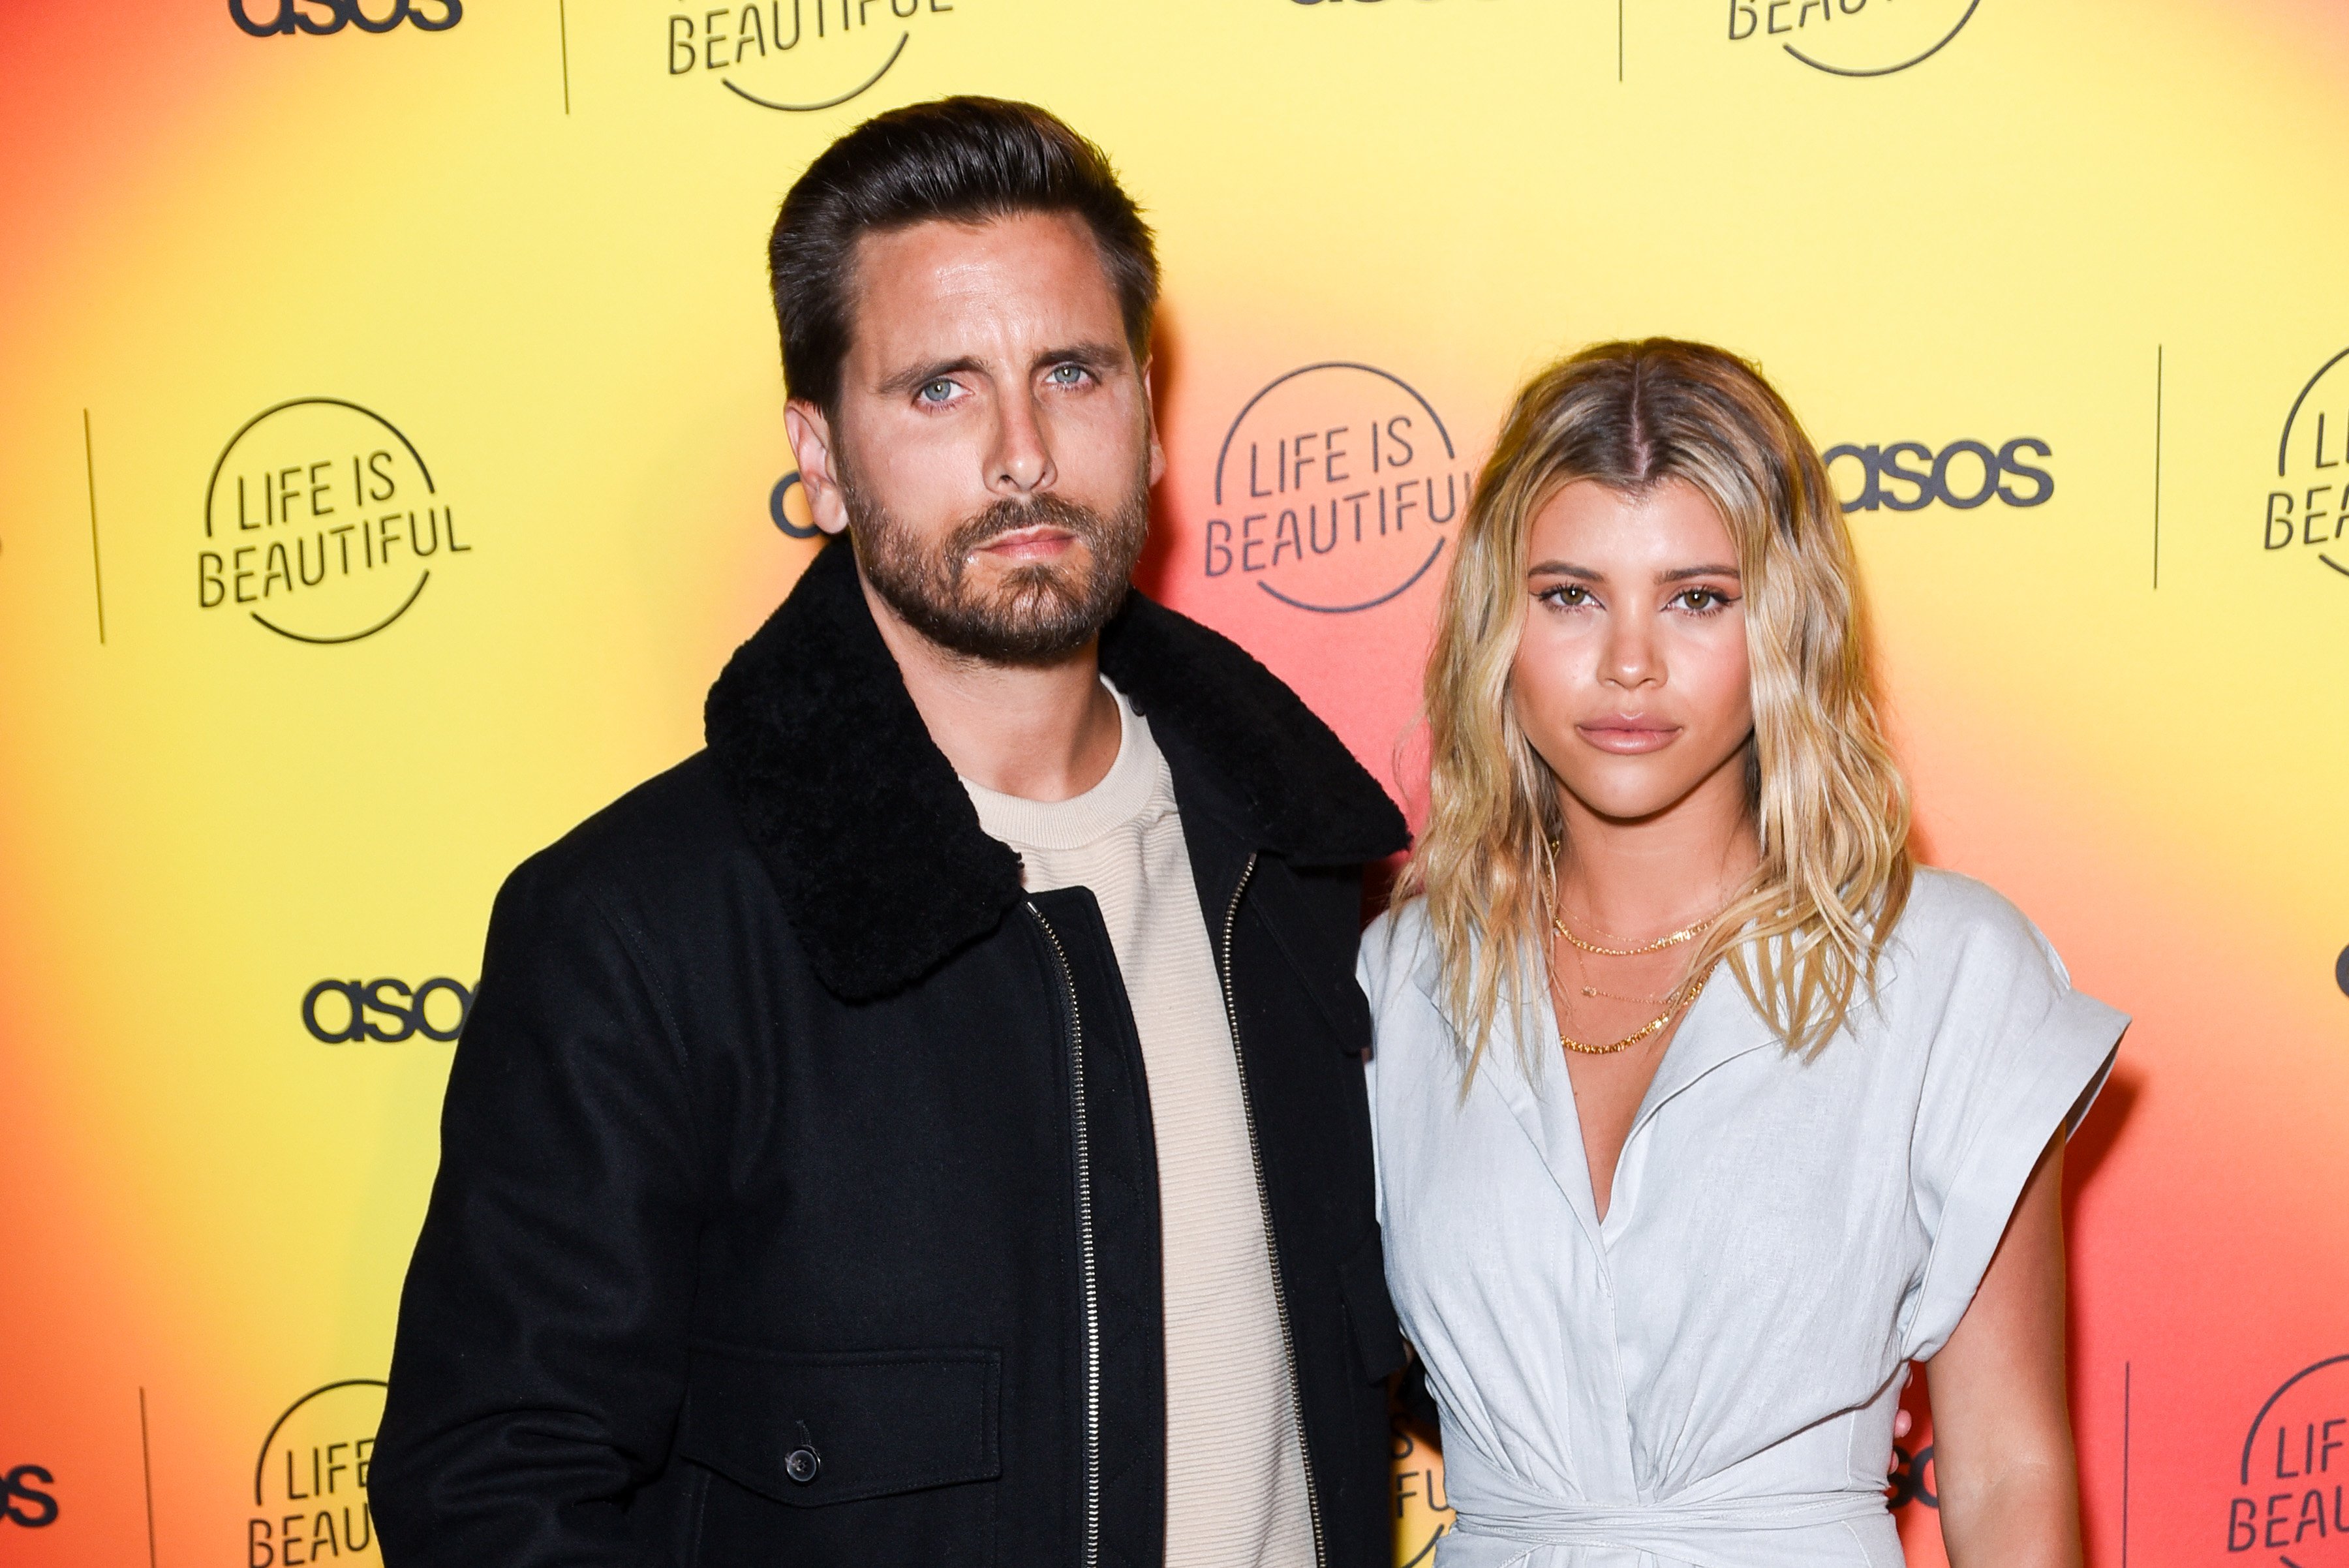 Scott Disick and Sofia Richie not smiling in front of an orange and yellow backdrop